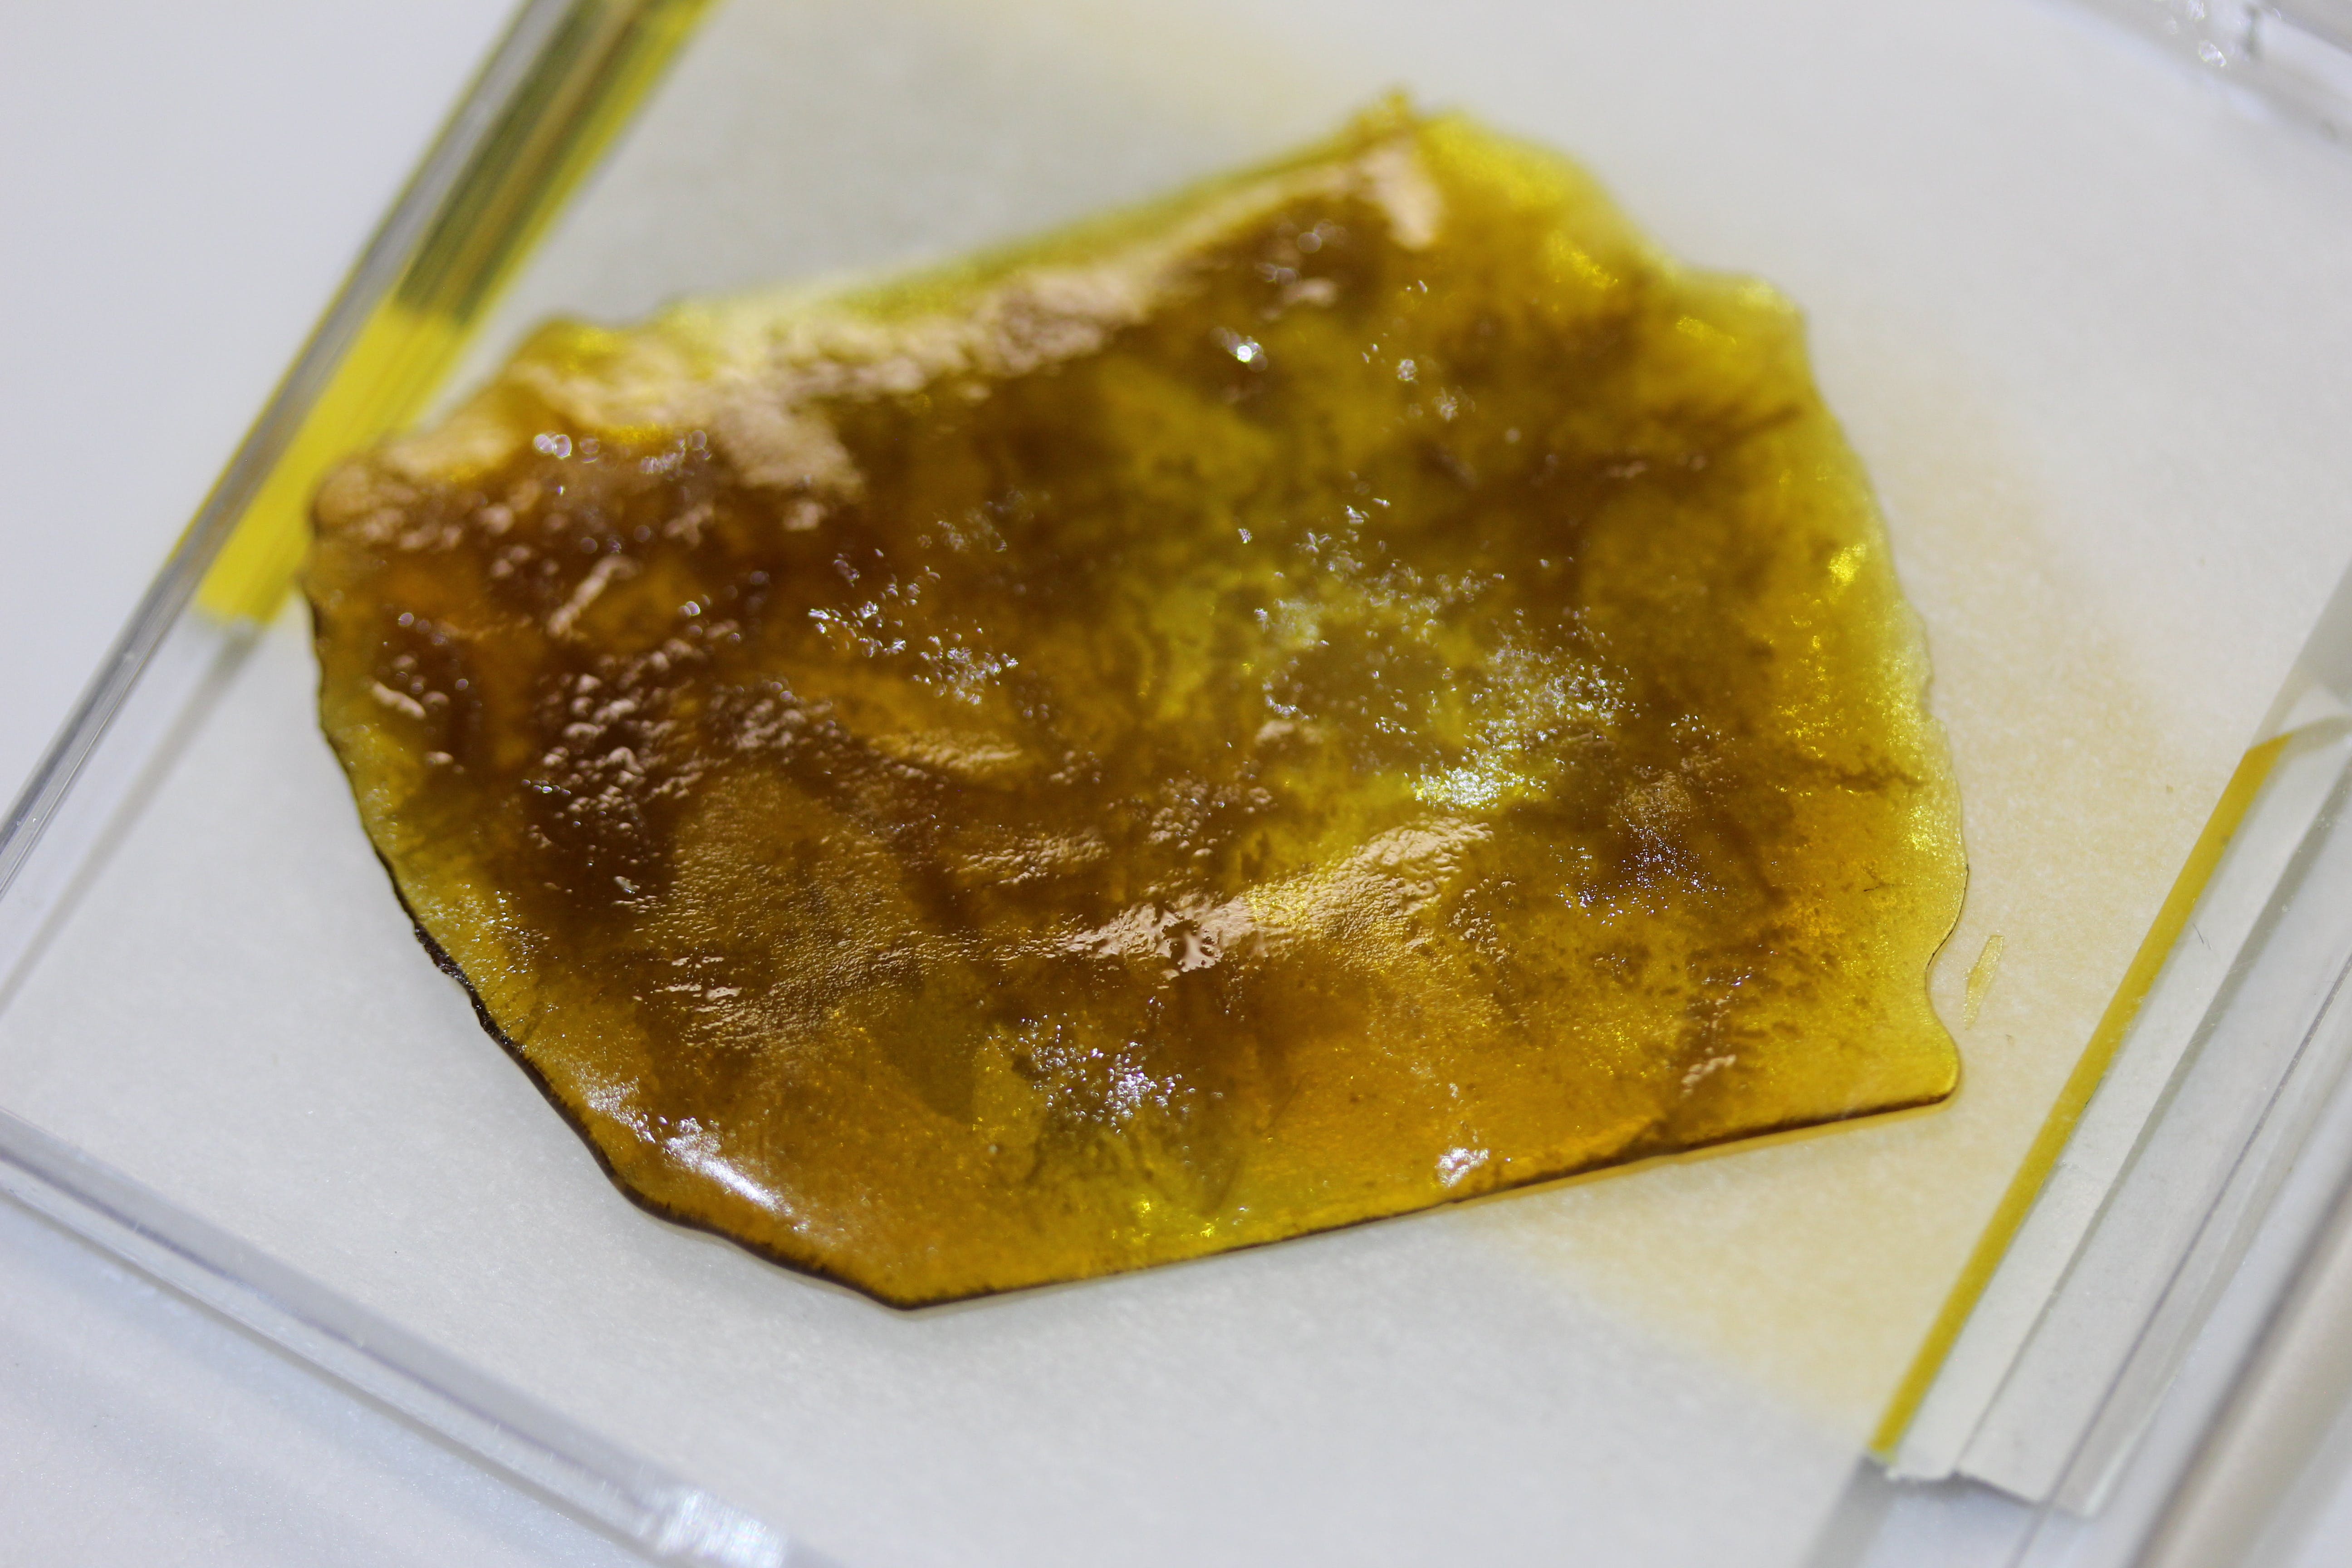 marijuana-dispensaries-815-wooten-rd-colorado-springs-ripped-bubba-shatter-famous-xtracts